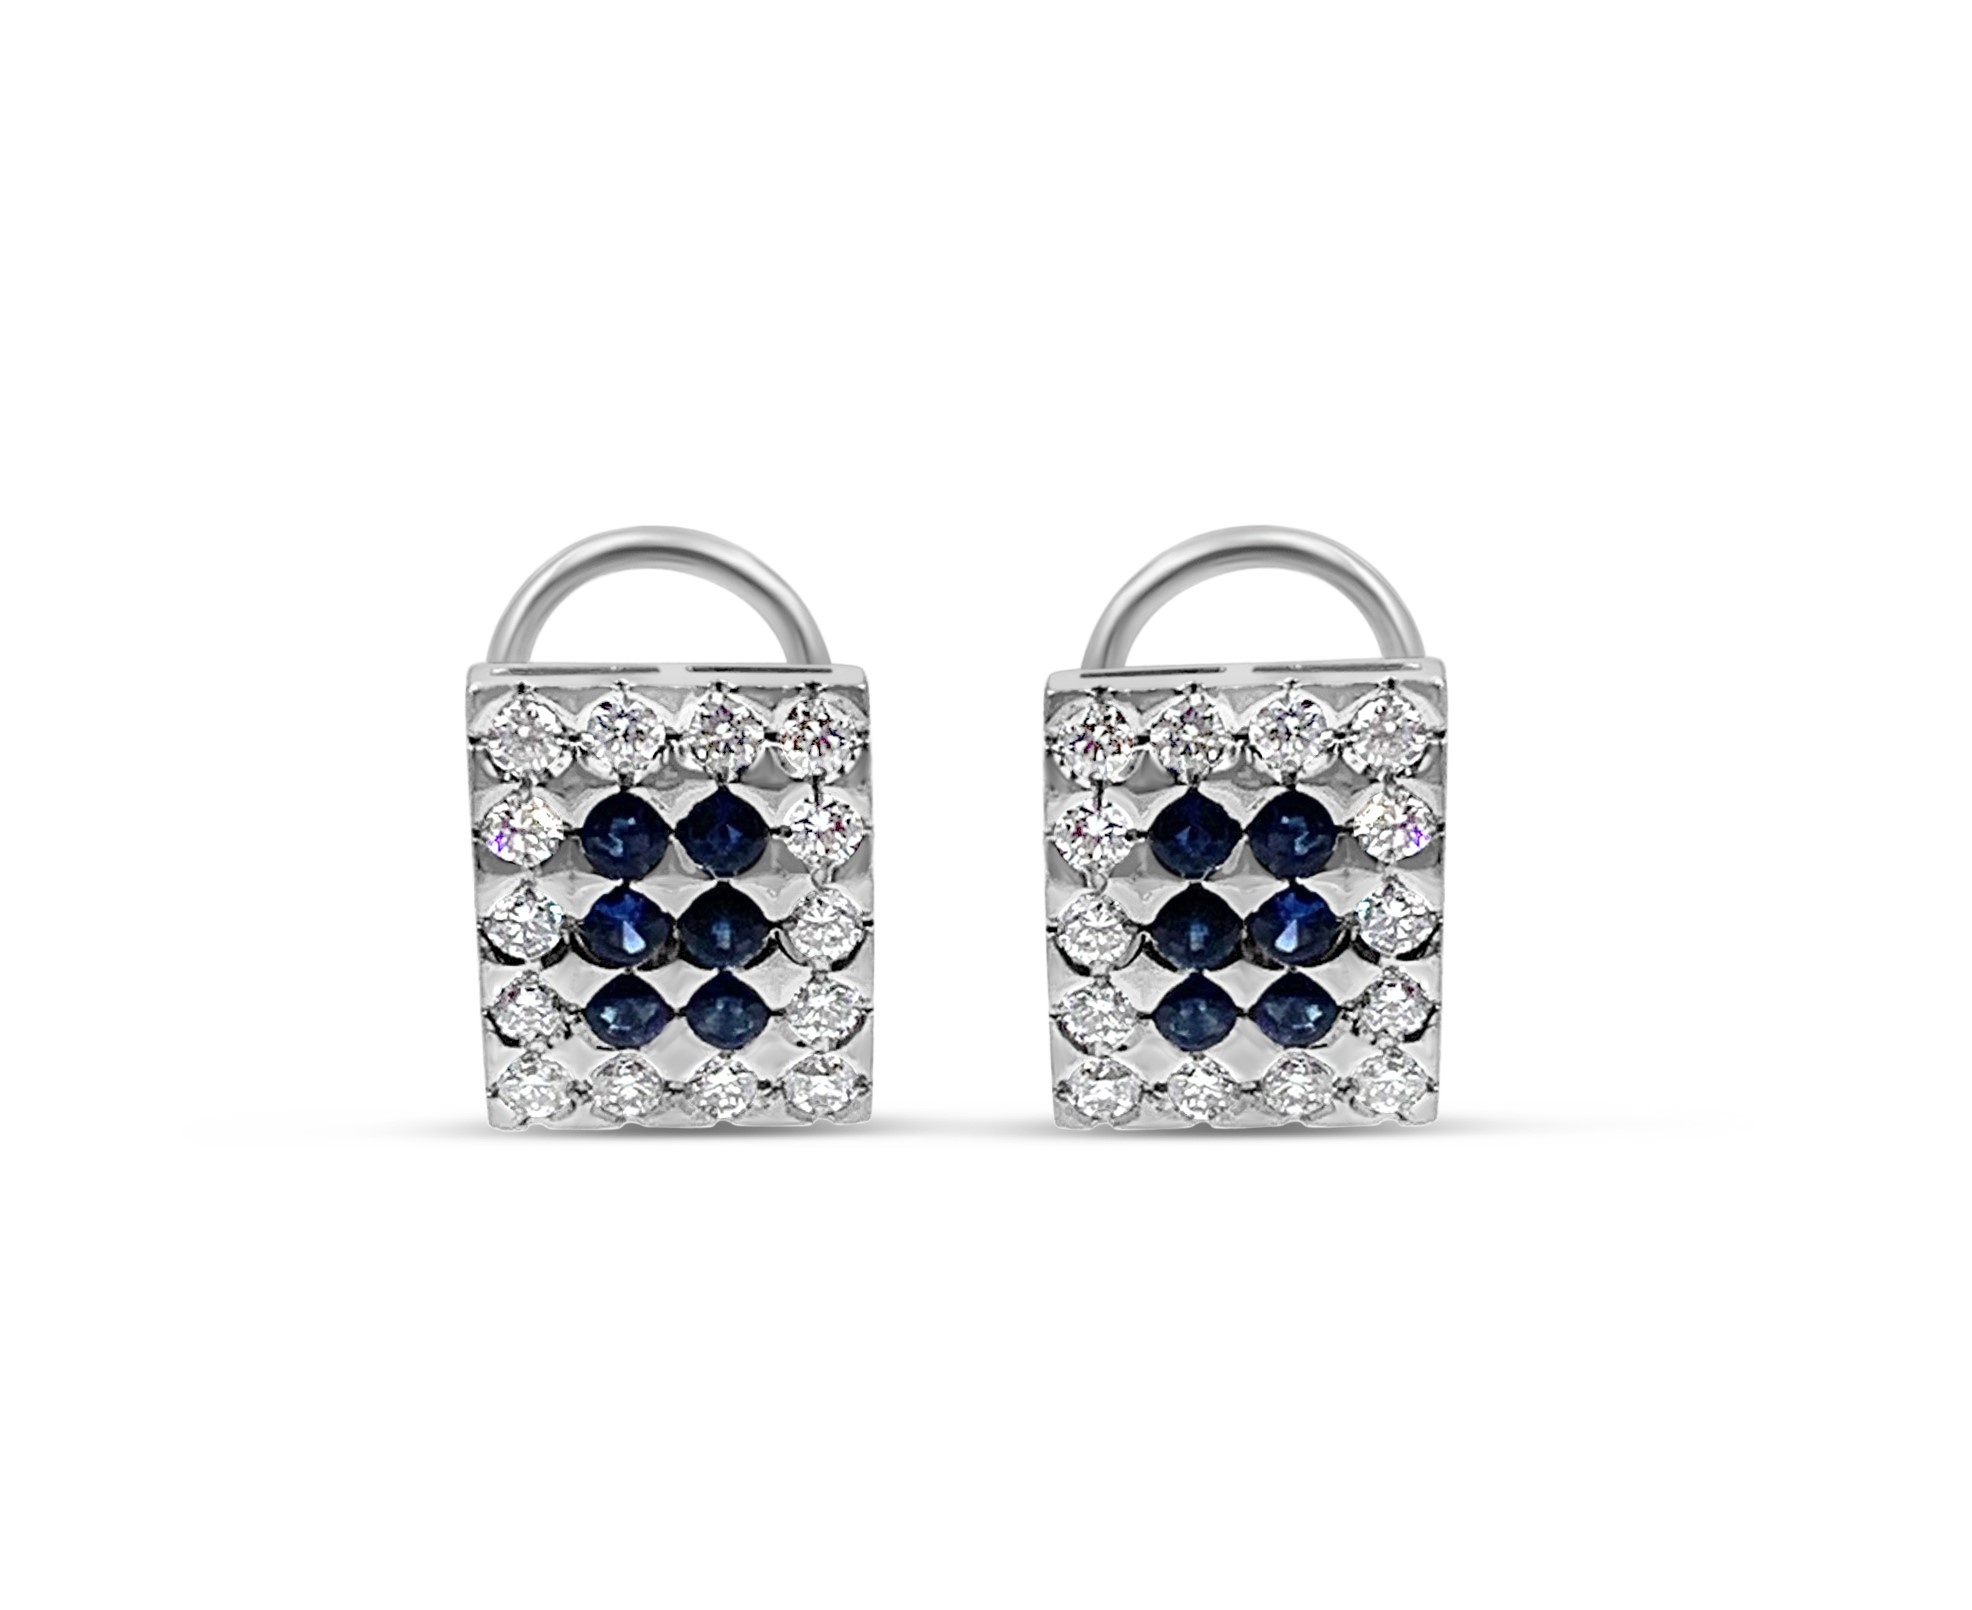 18k white gold earrings with 1,70ct diamonds & 0,75ct sapphire